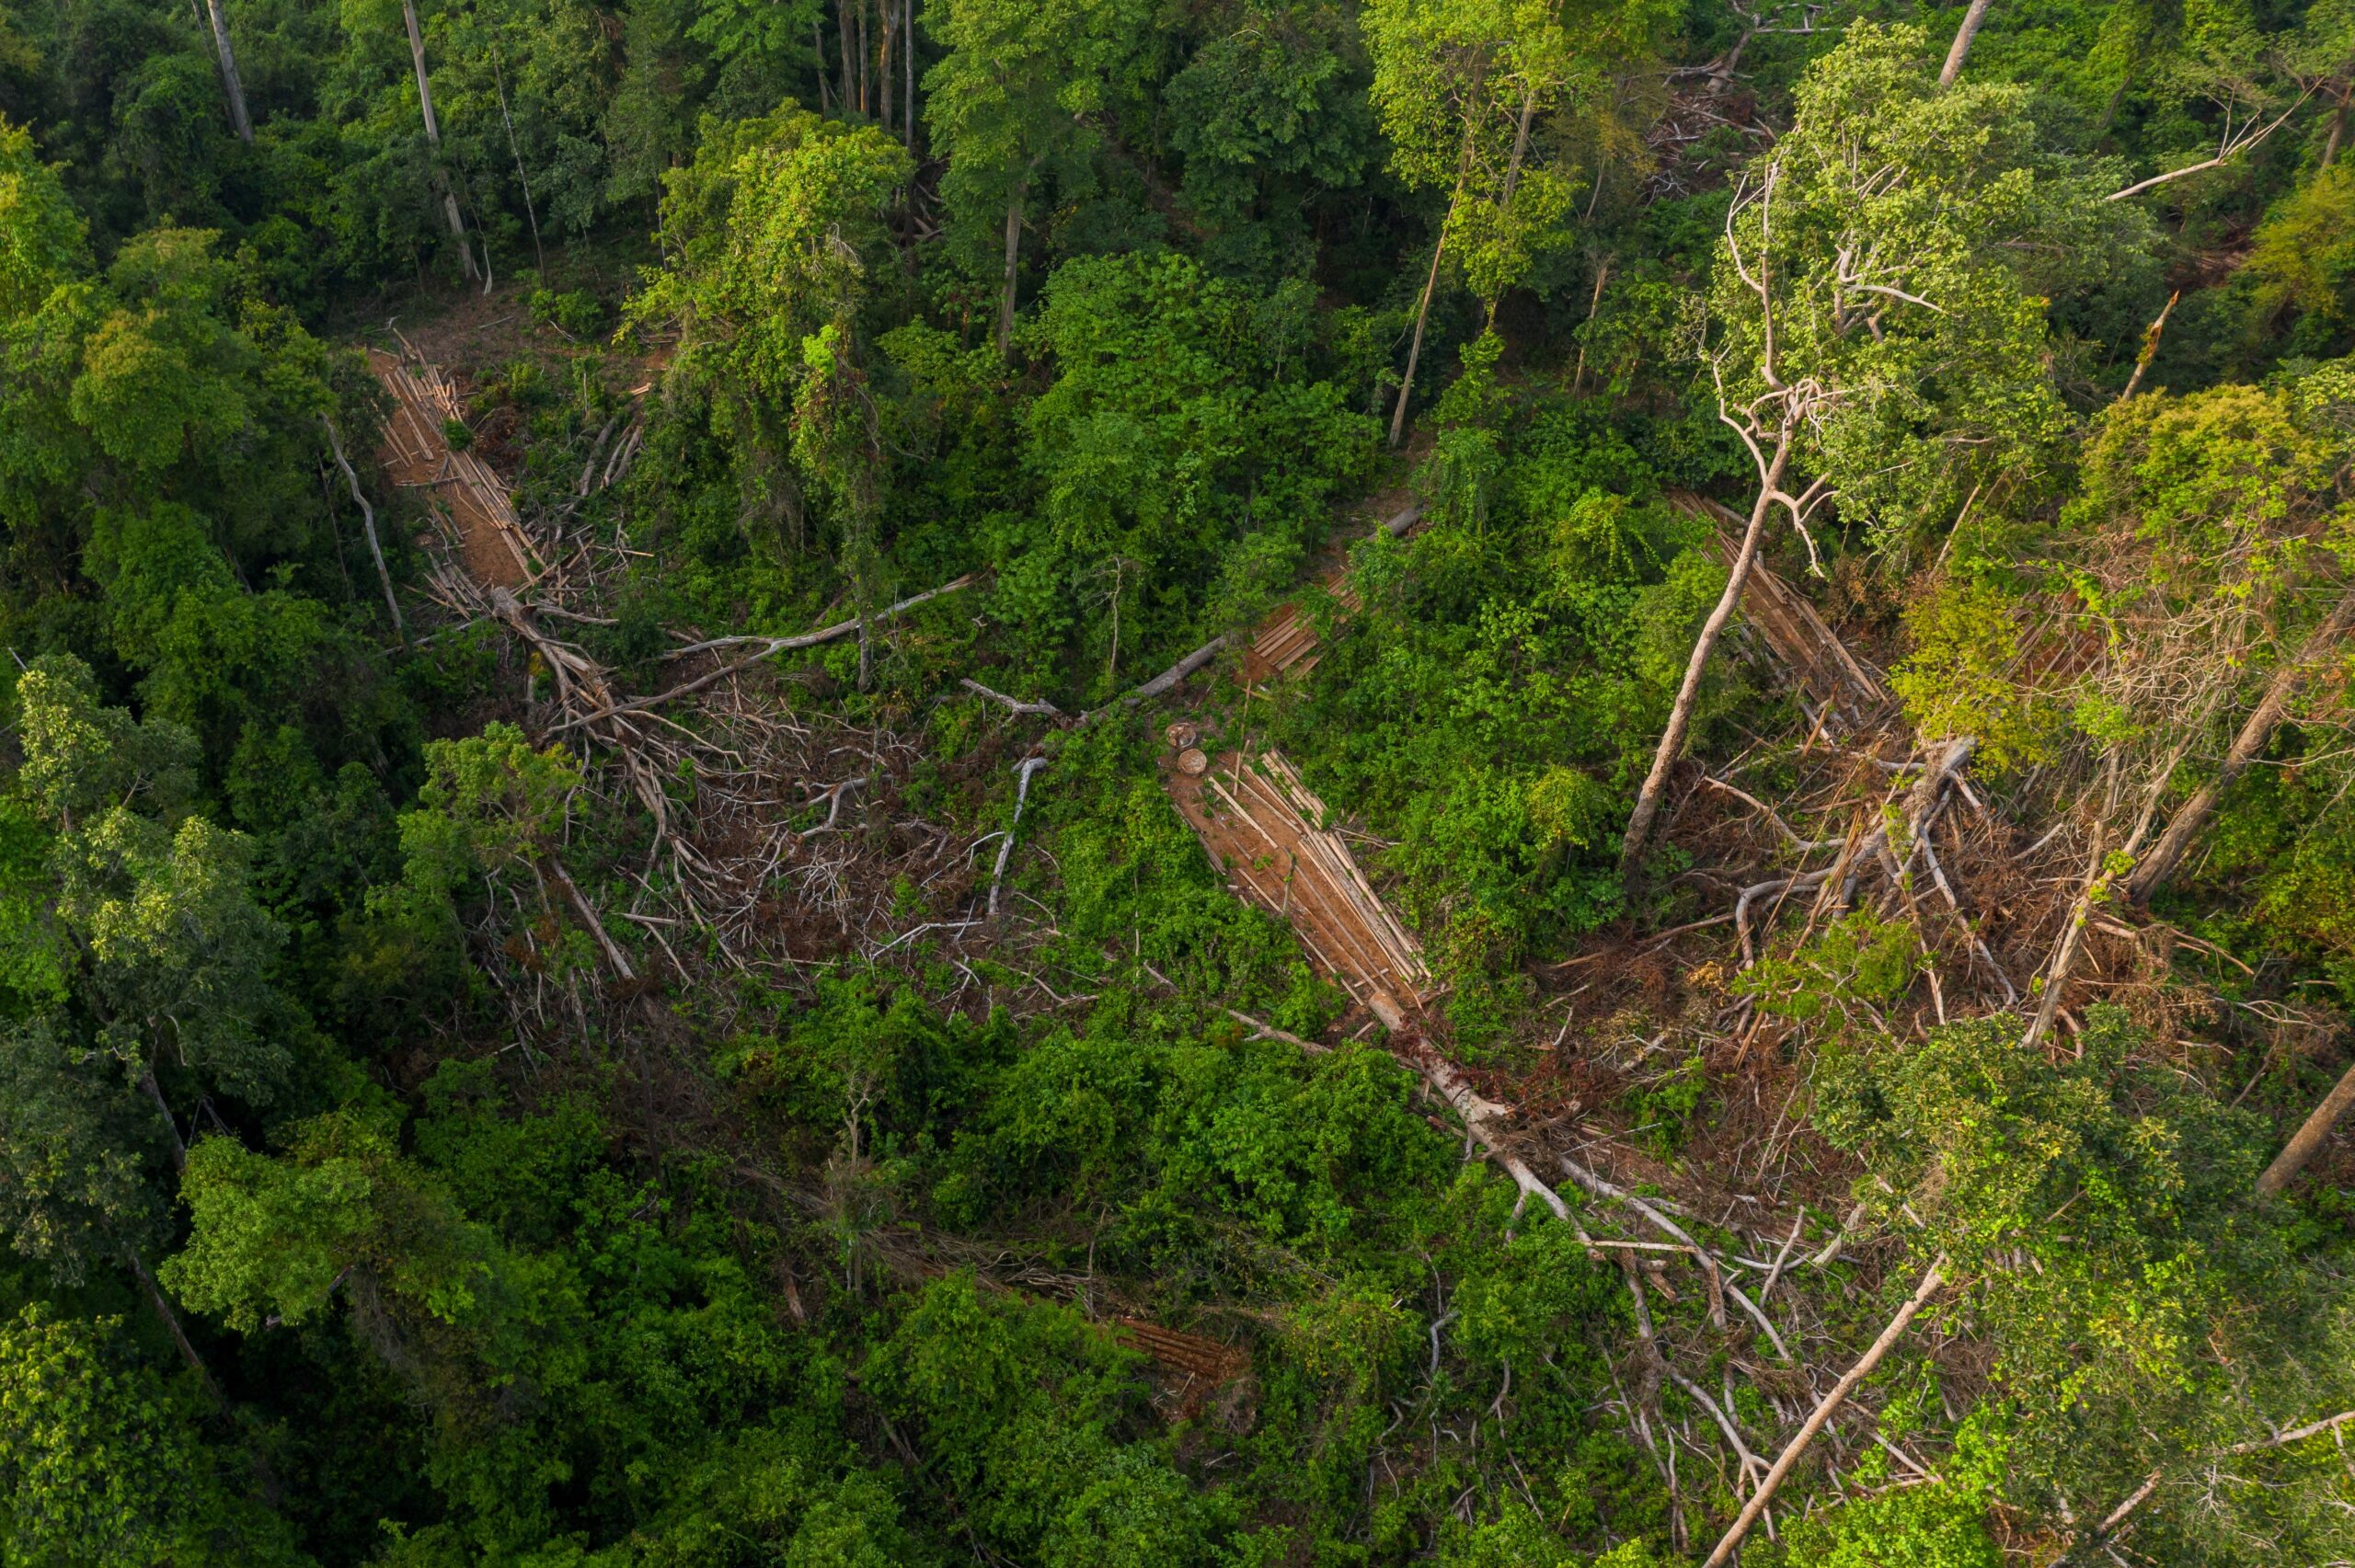 Loggers typically target a cluster of high-value old-growth trees, making it easier for the community to track the path of destruction through their forest patrols. Image by Andy Ball / Mongabay.